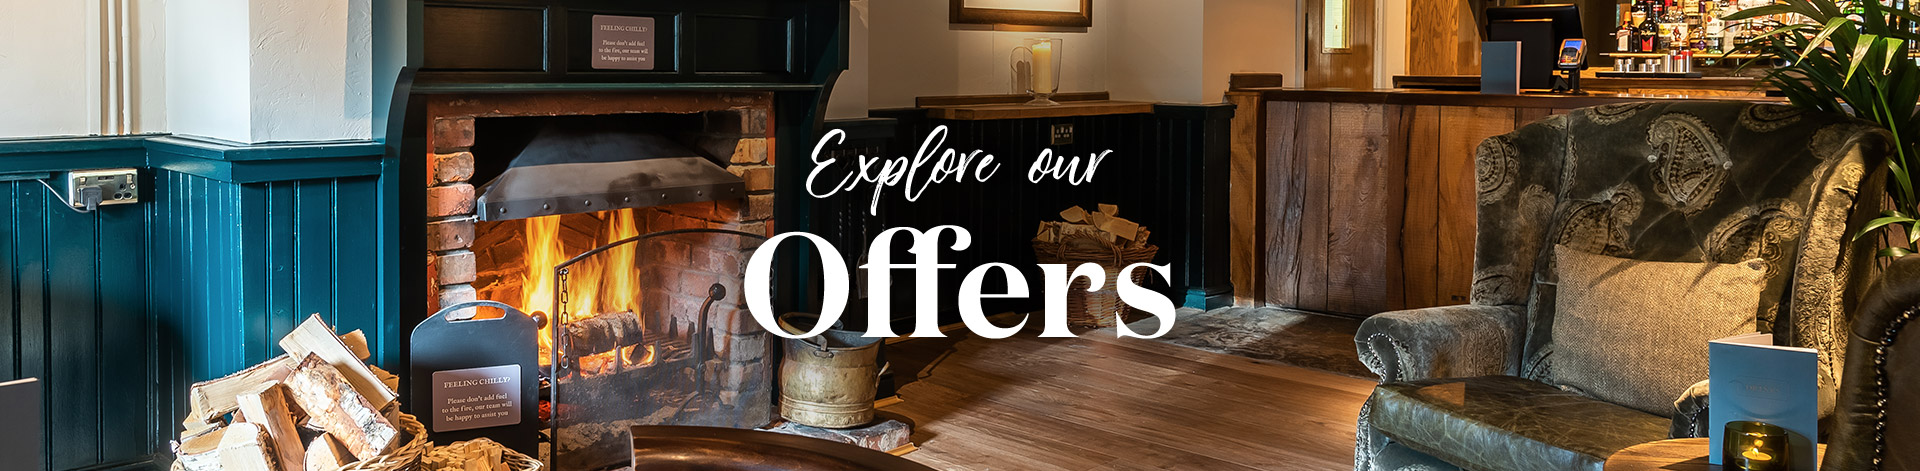 Our latest offers at The Beachy Head